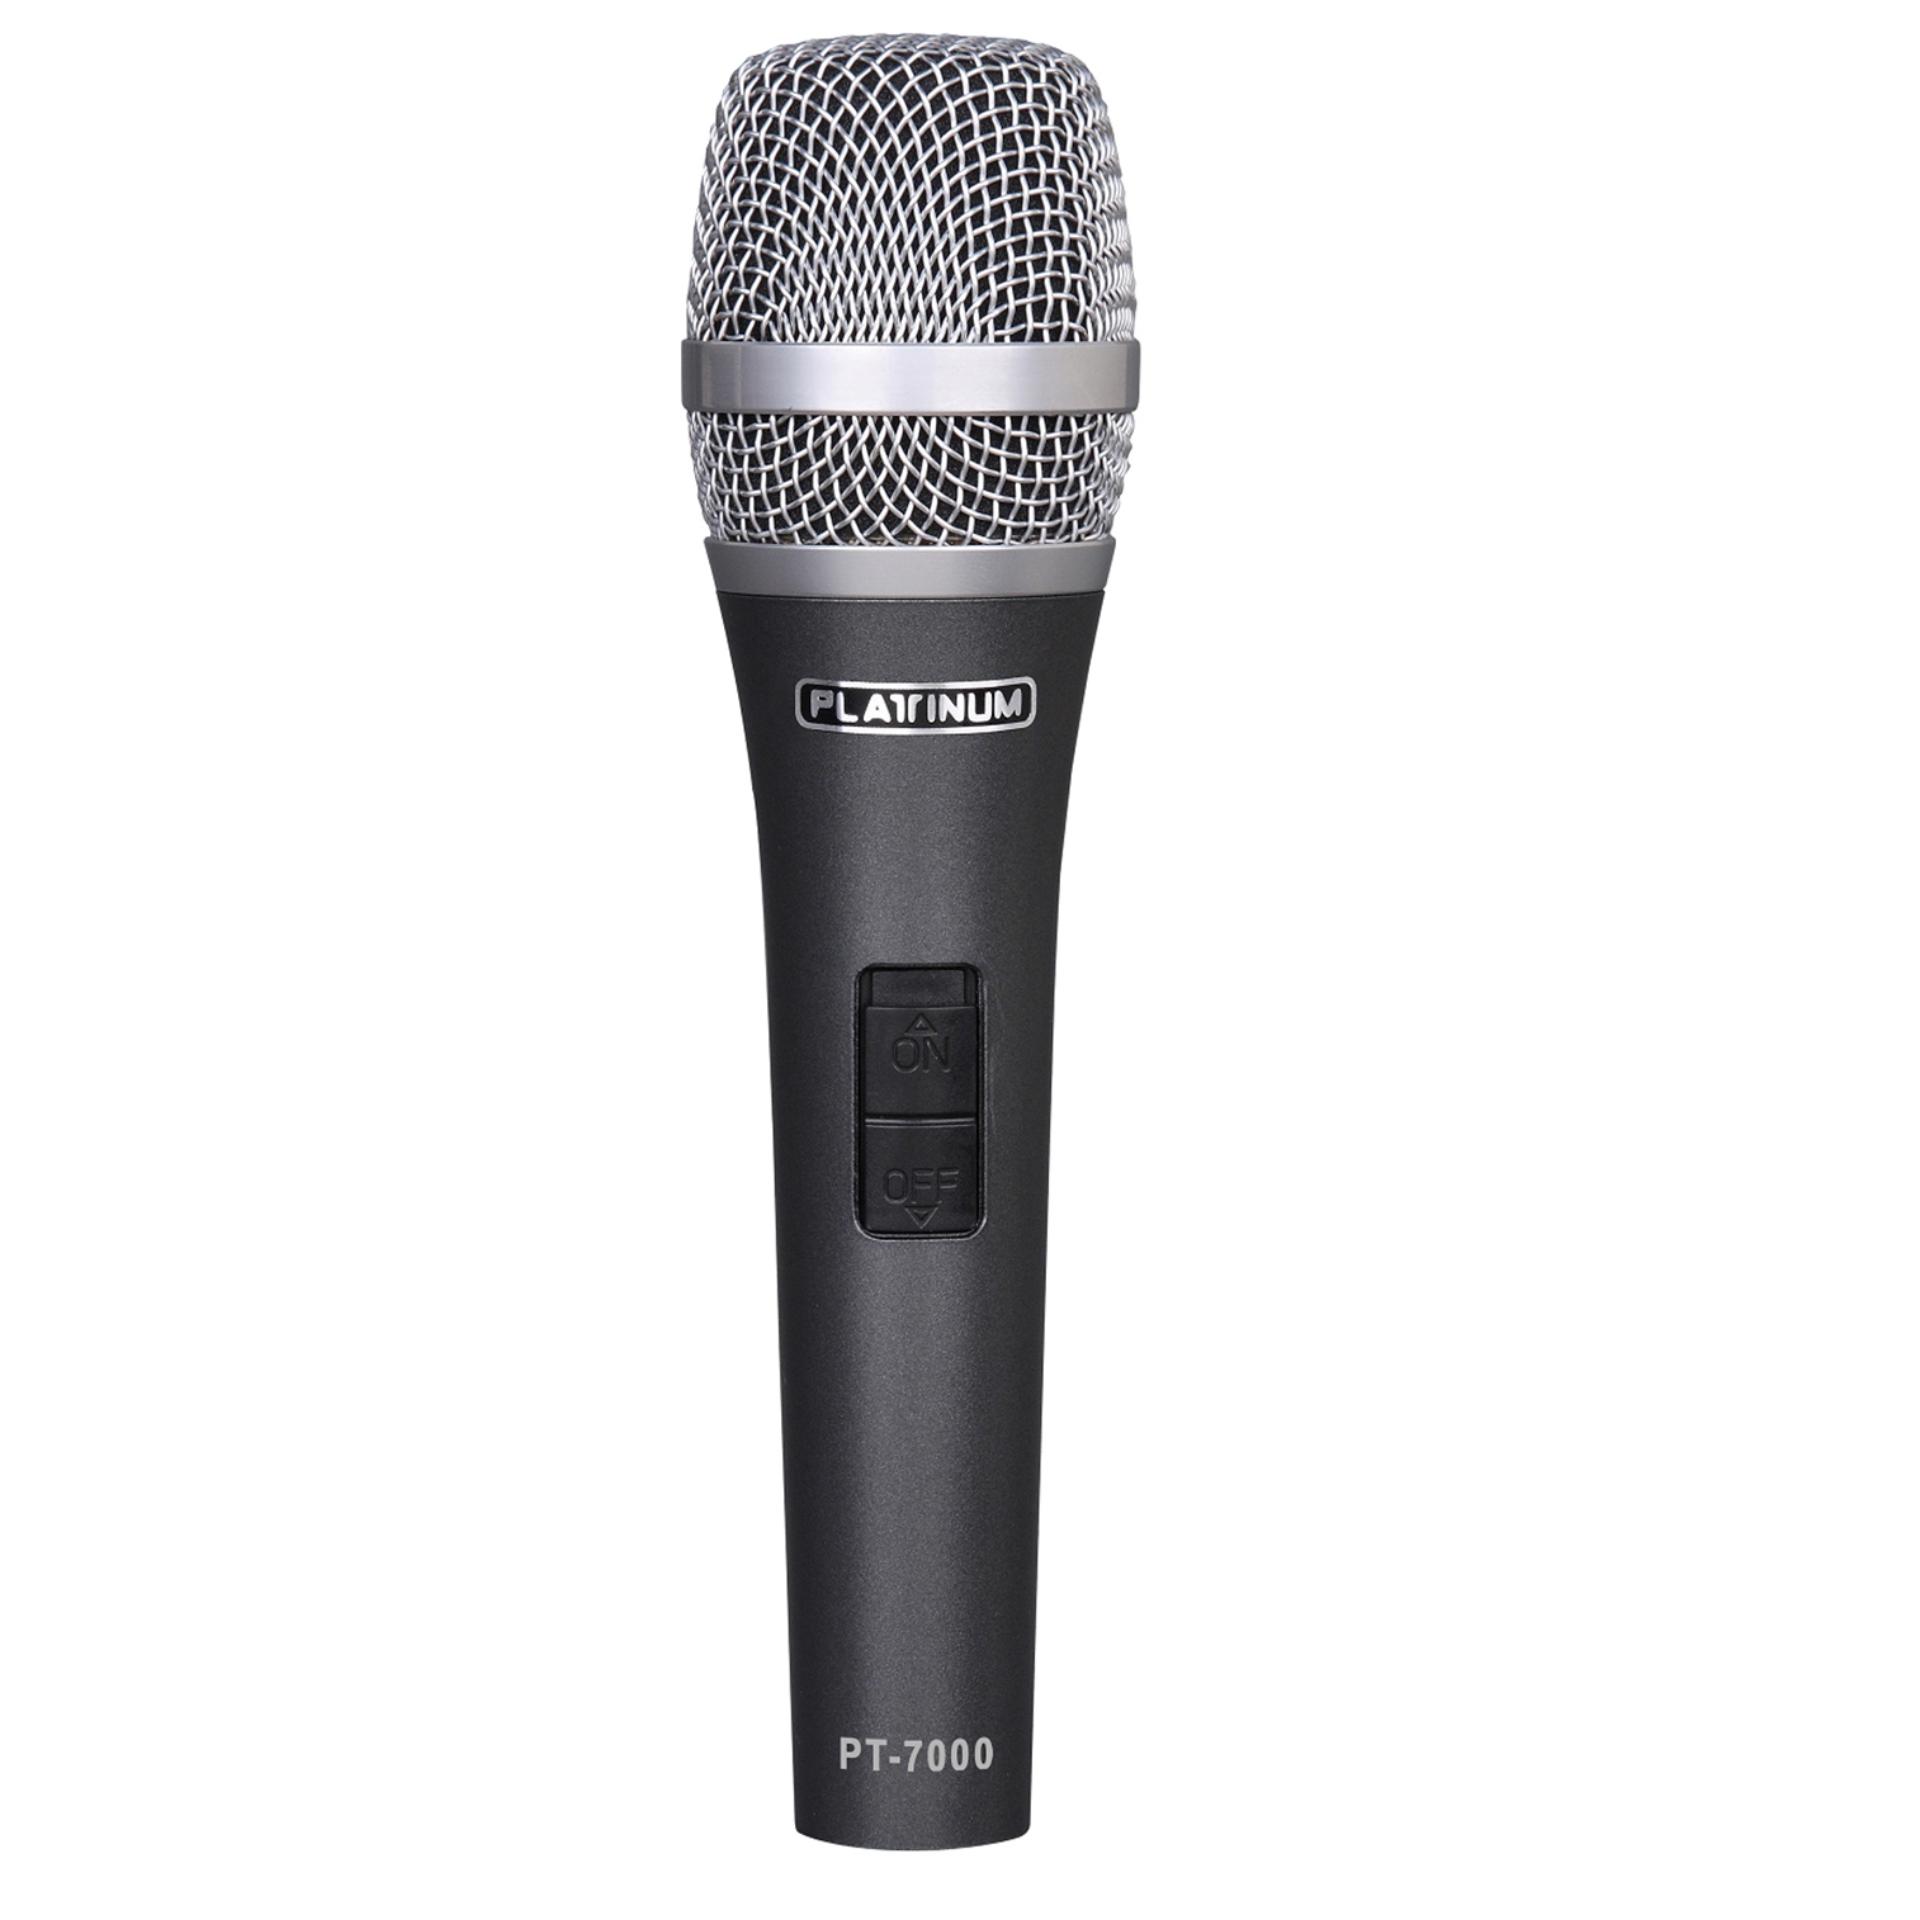 Wireless Mic for sale - Wireless Microphone prices, brands & specs ...